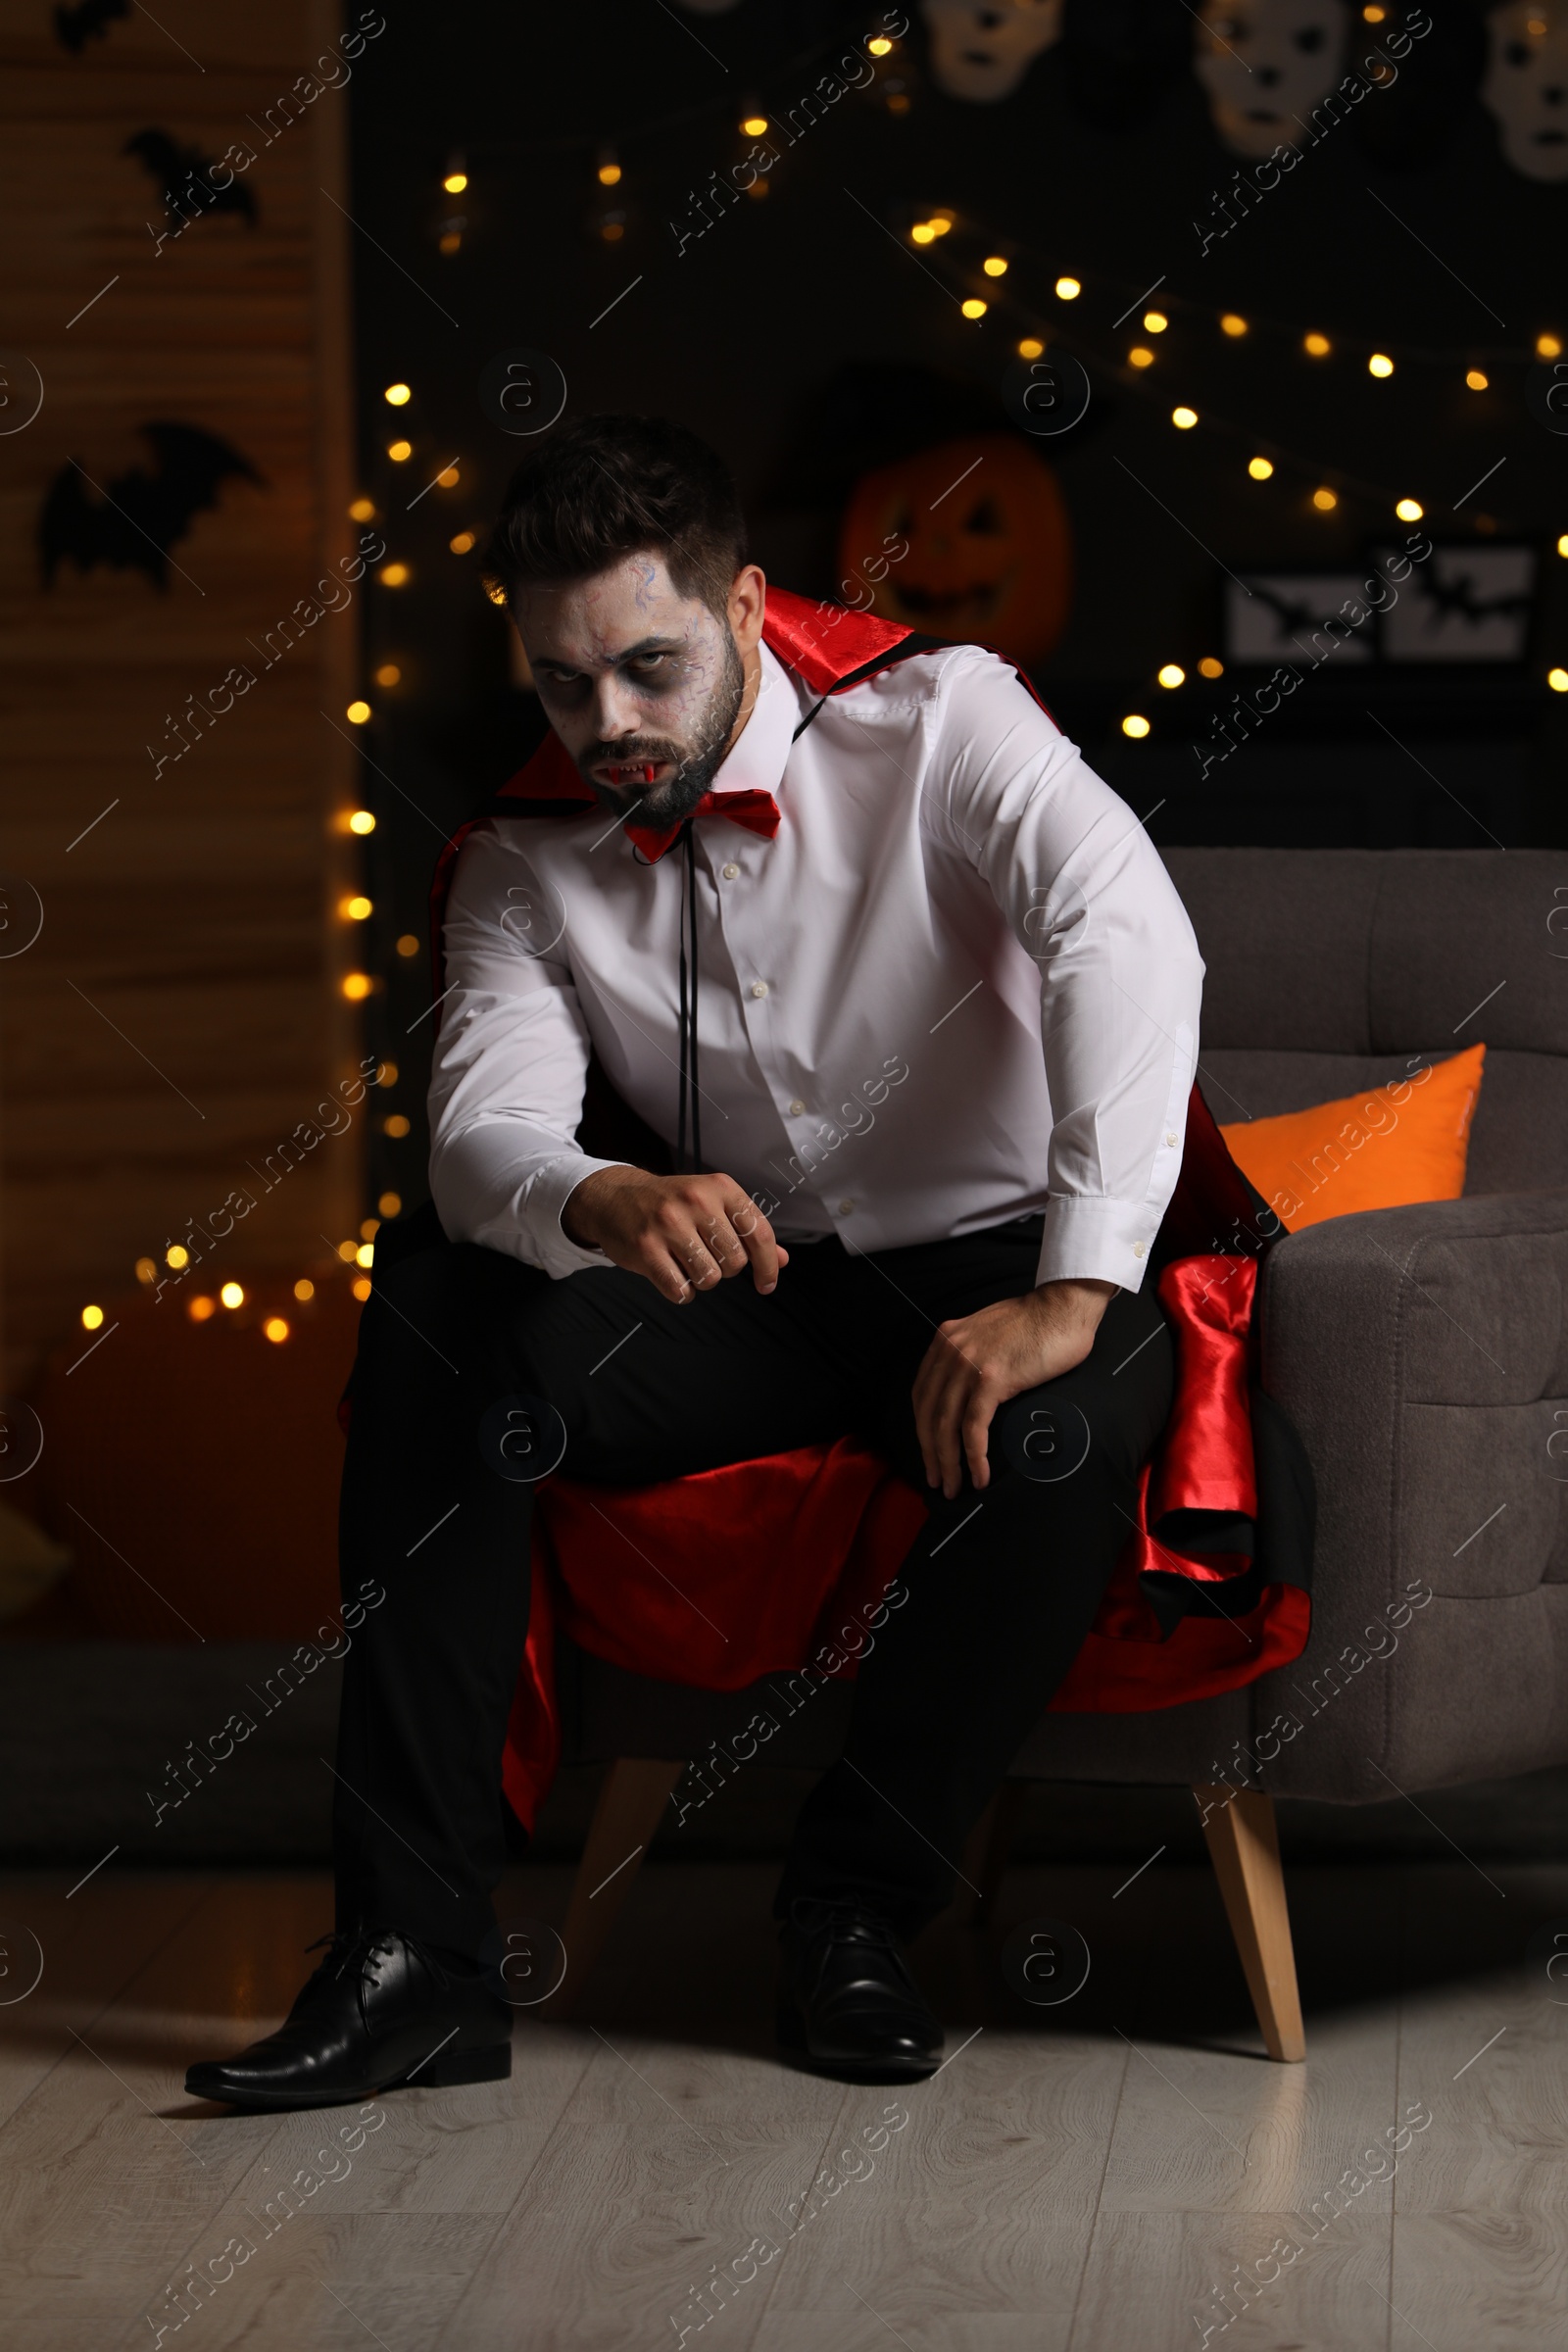 Photo of Man in scary vampire costume against blurred lights indoors. Halloween celebration